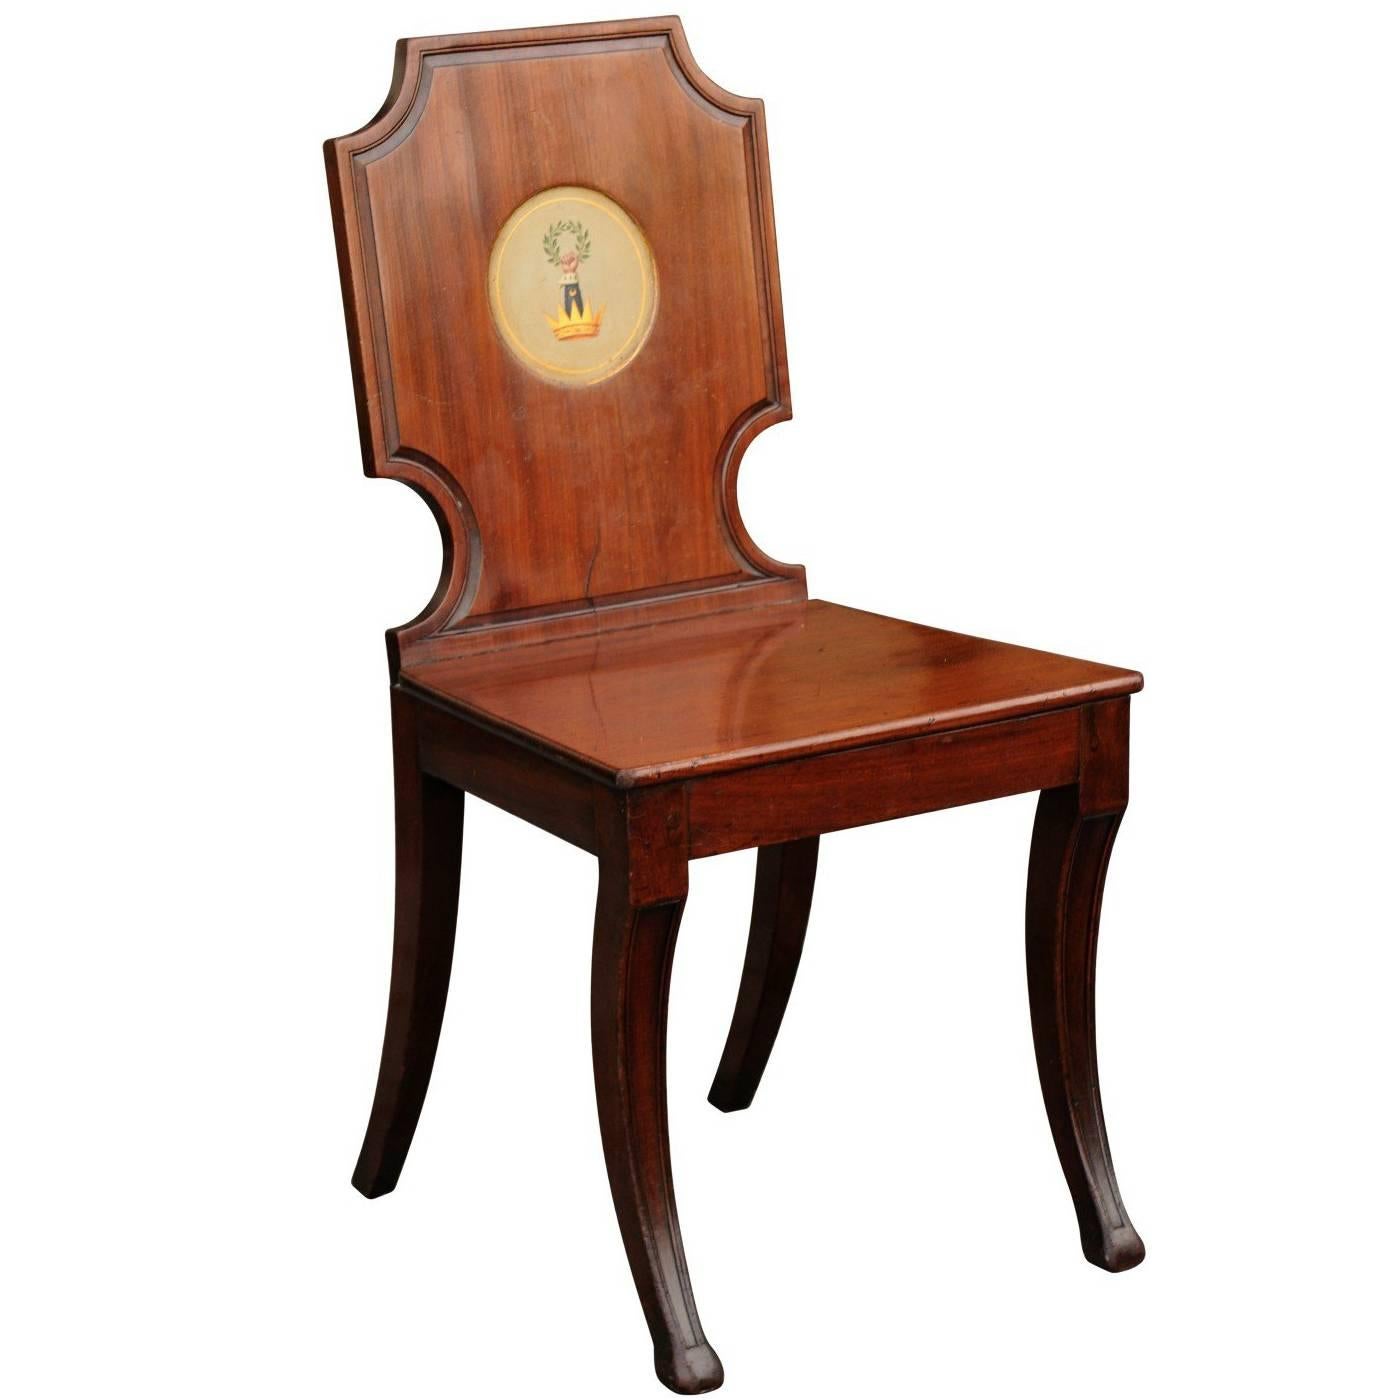 English 1840s Wooden Hall Chair with Cartouche-Shaped Back and Painted Crest